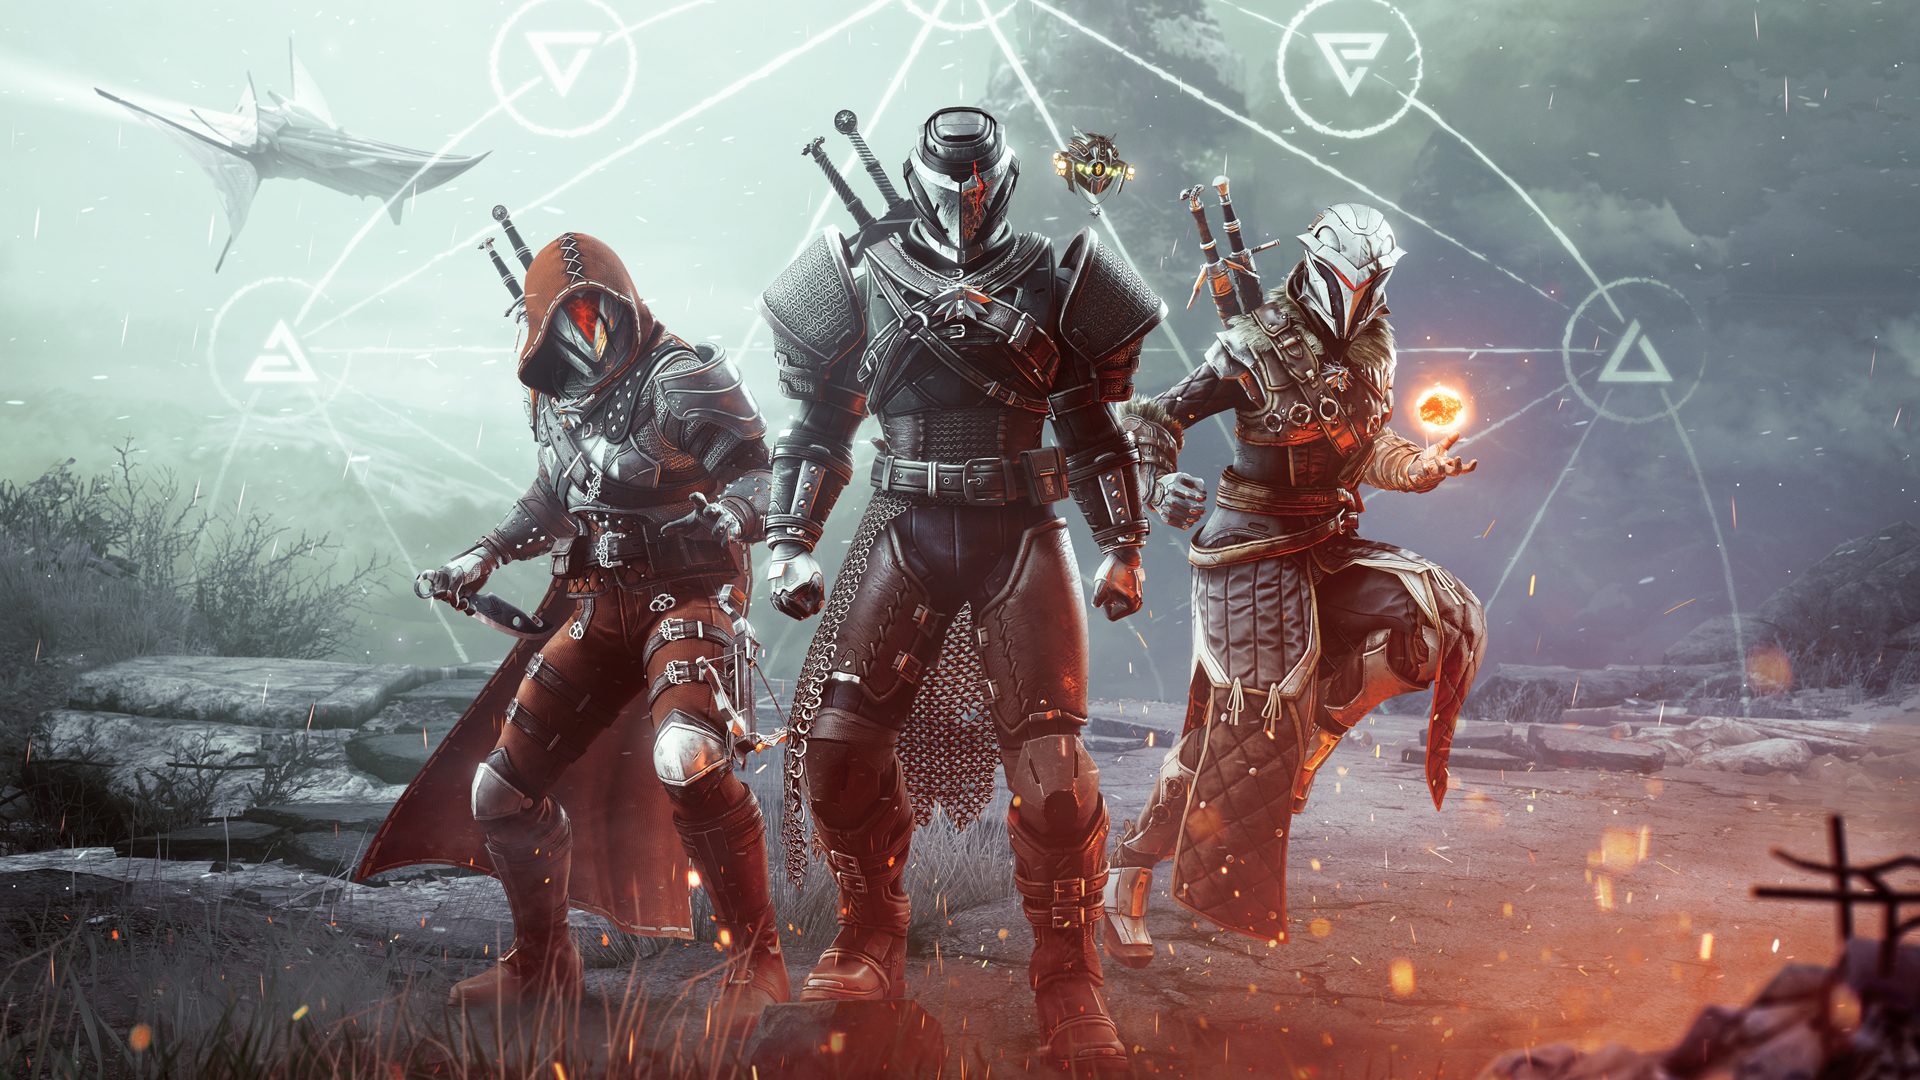 Destiny 2 x The Witcher collab details revealed, available today – PlayStation.Blog